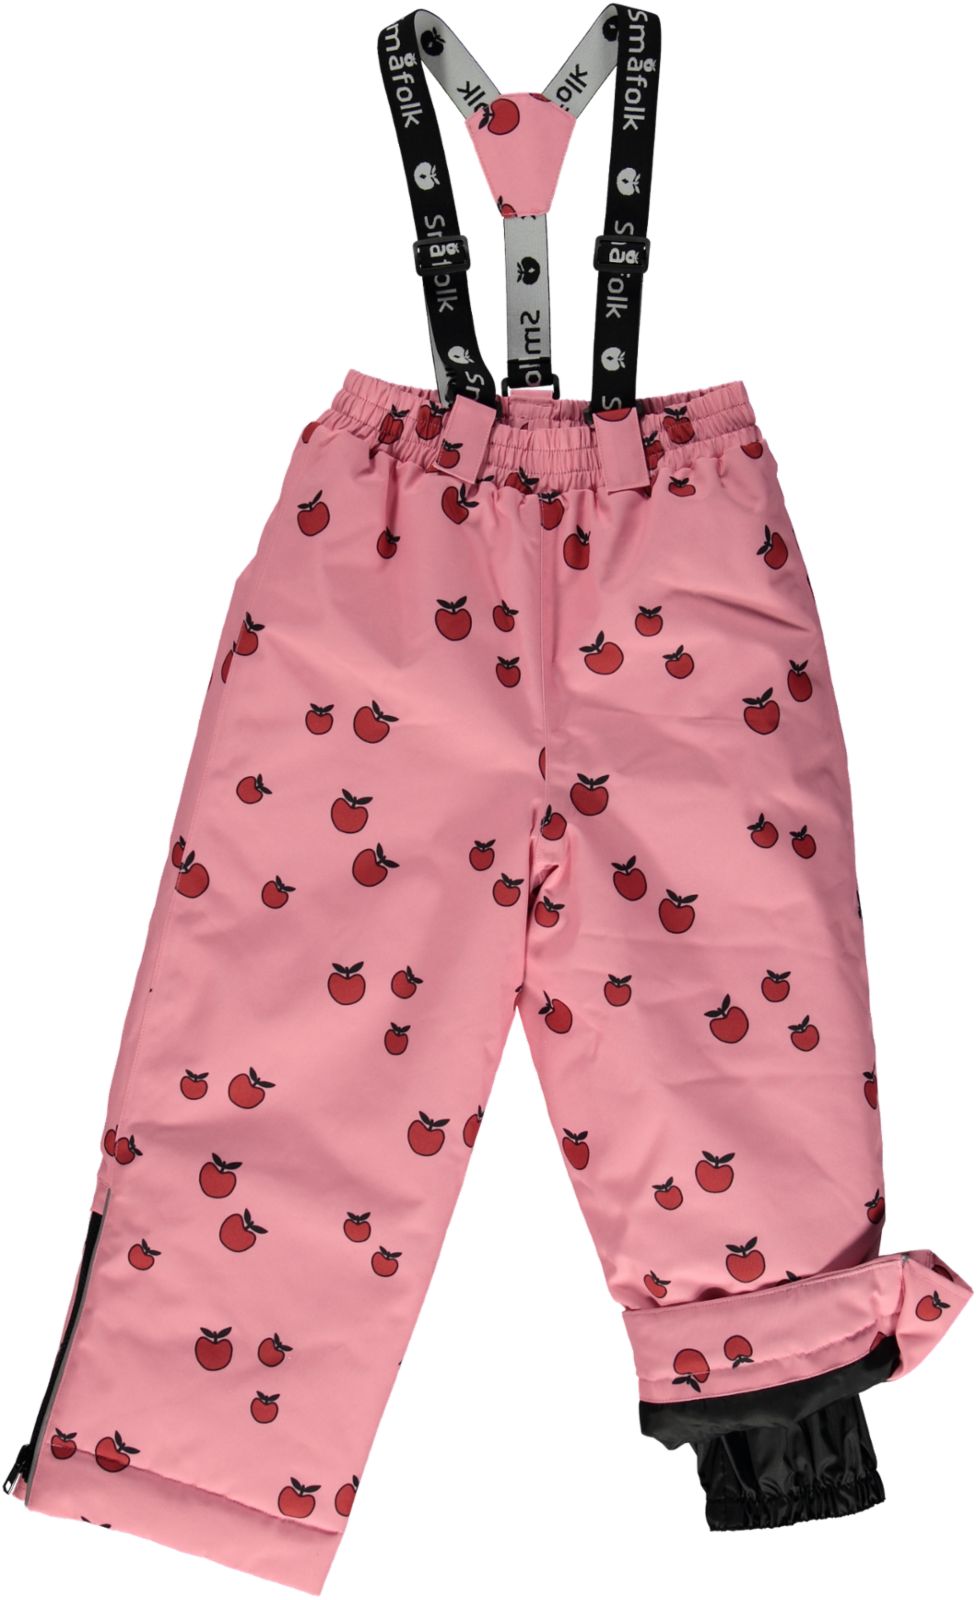 Winter pants with Apples